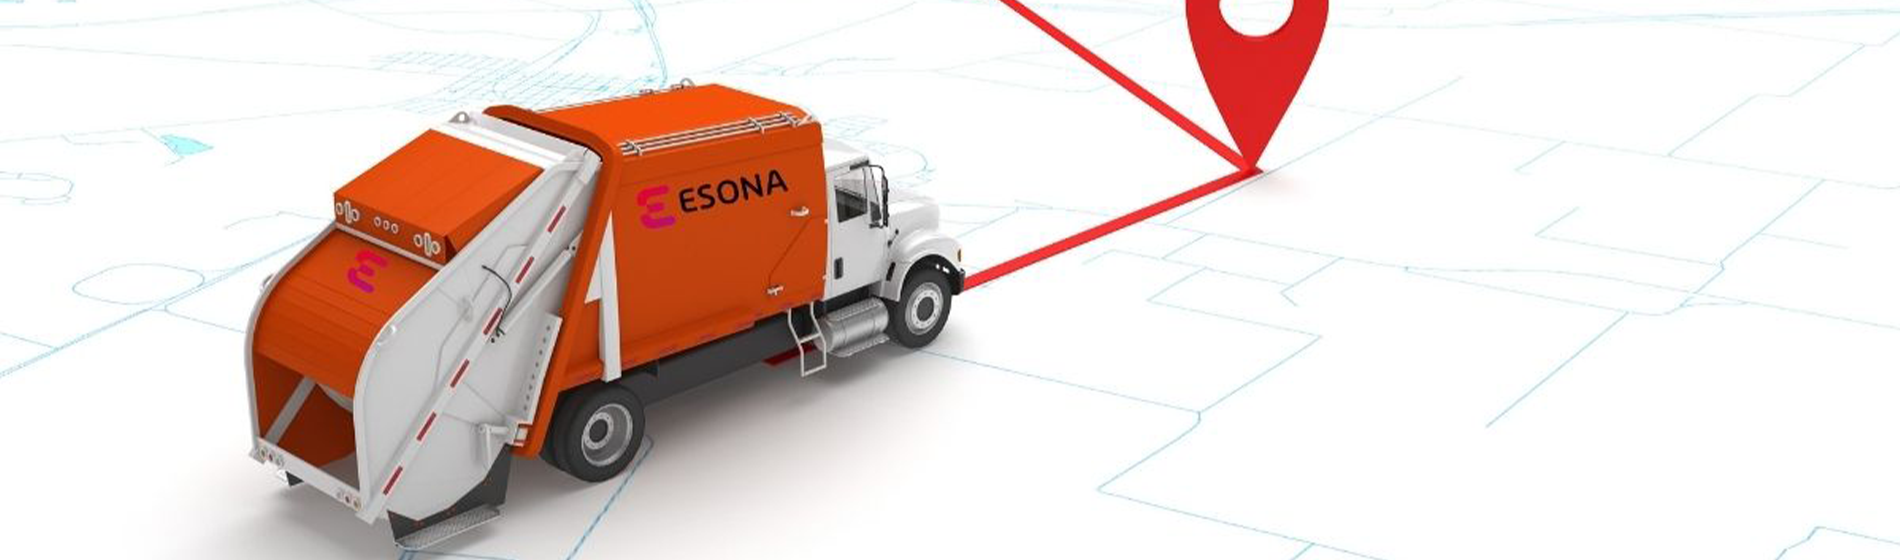 Classic waste collection versus export with ESONA